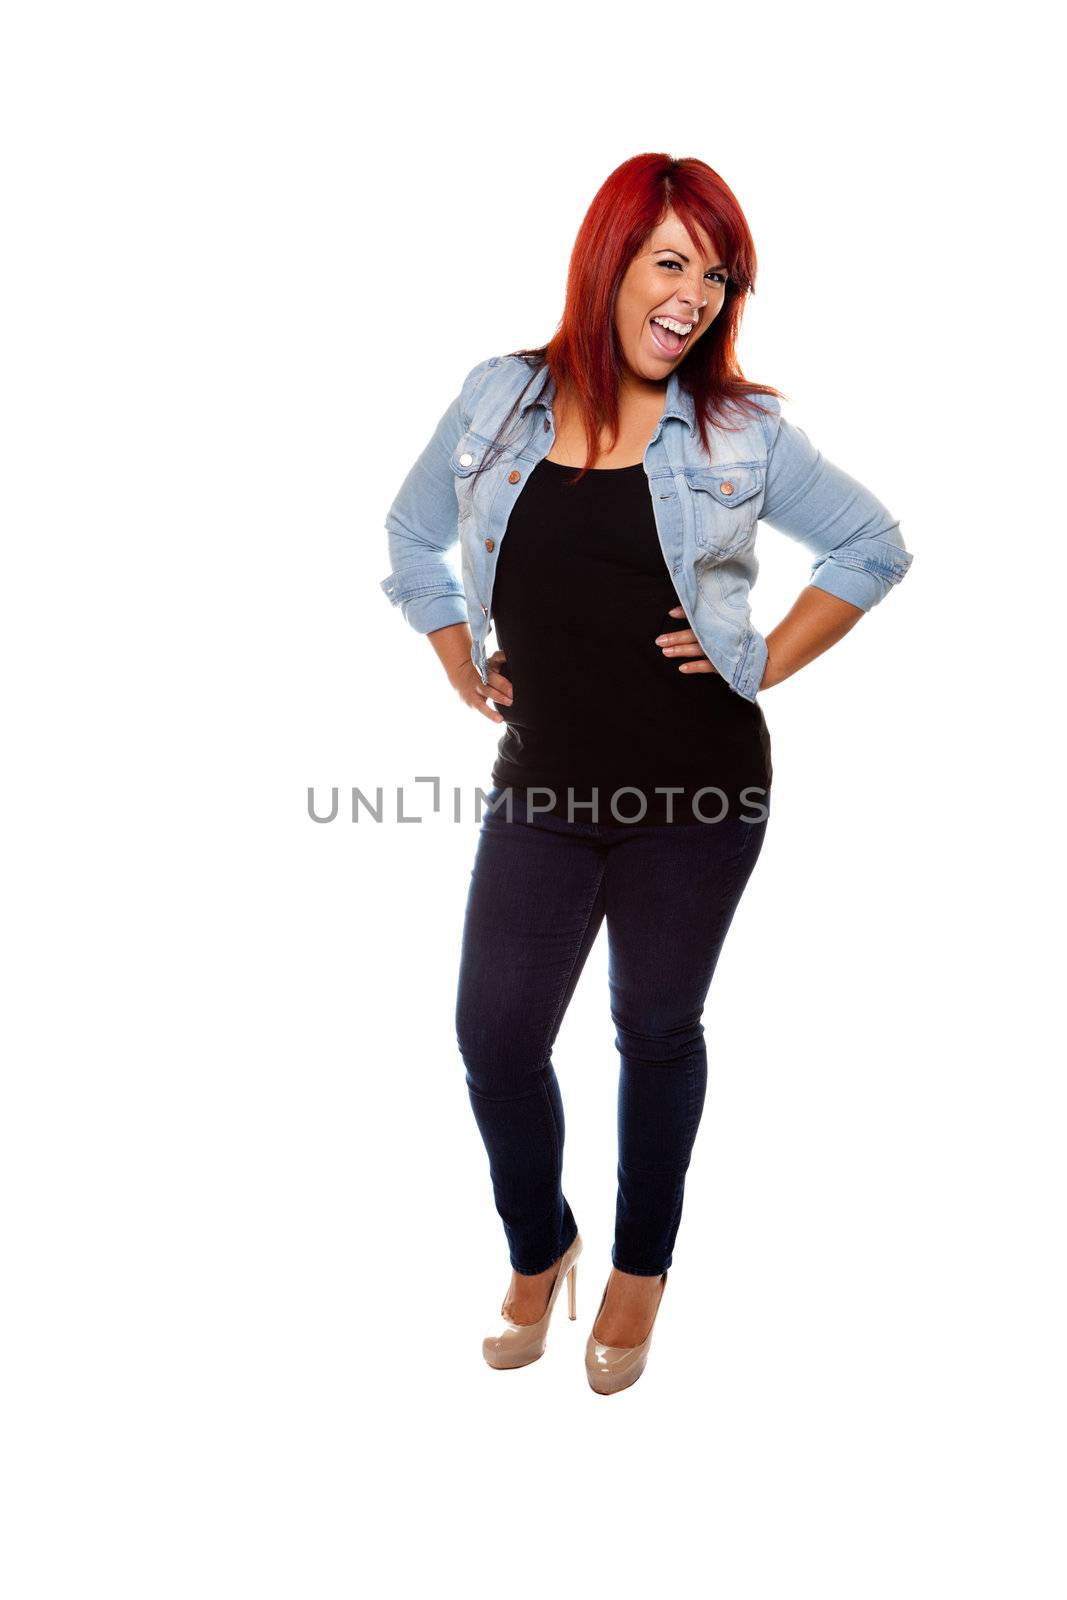 Young woman proudly shows off her physique with her hands on her hips wearing jeans over a white background.